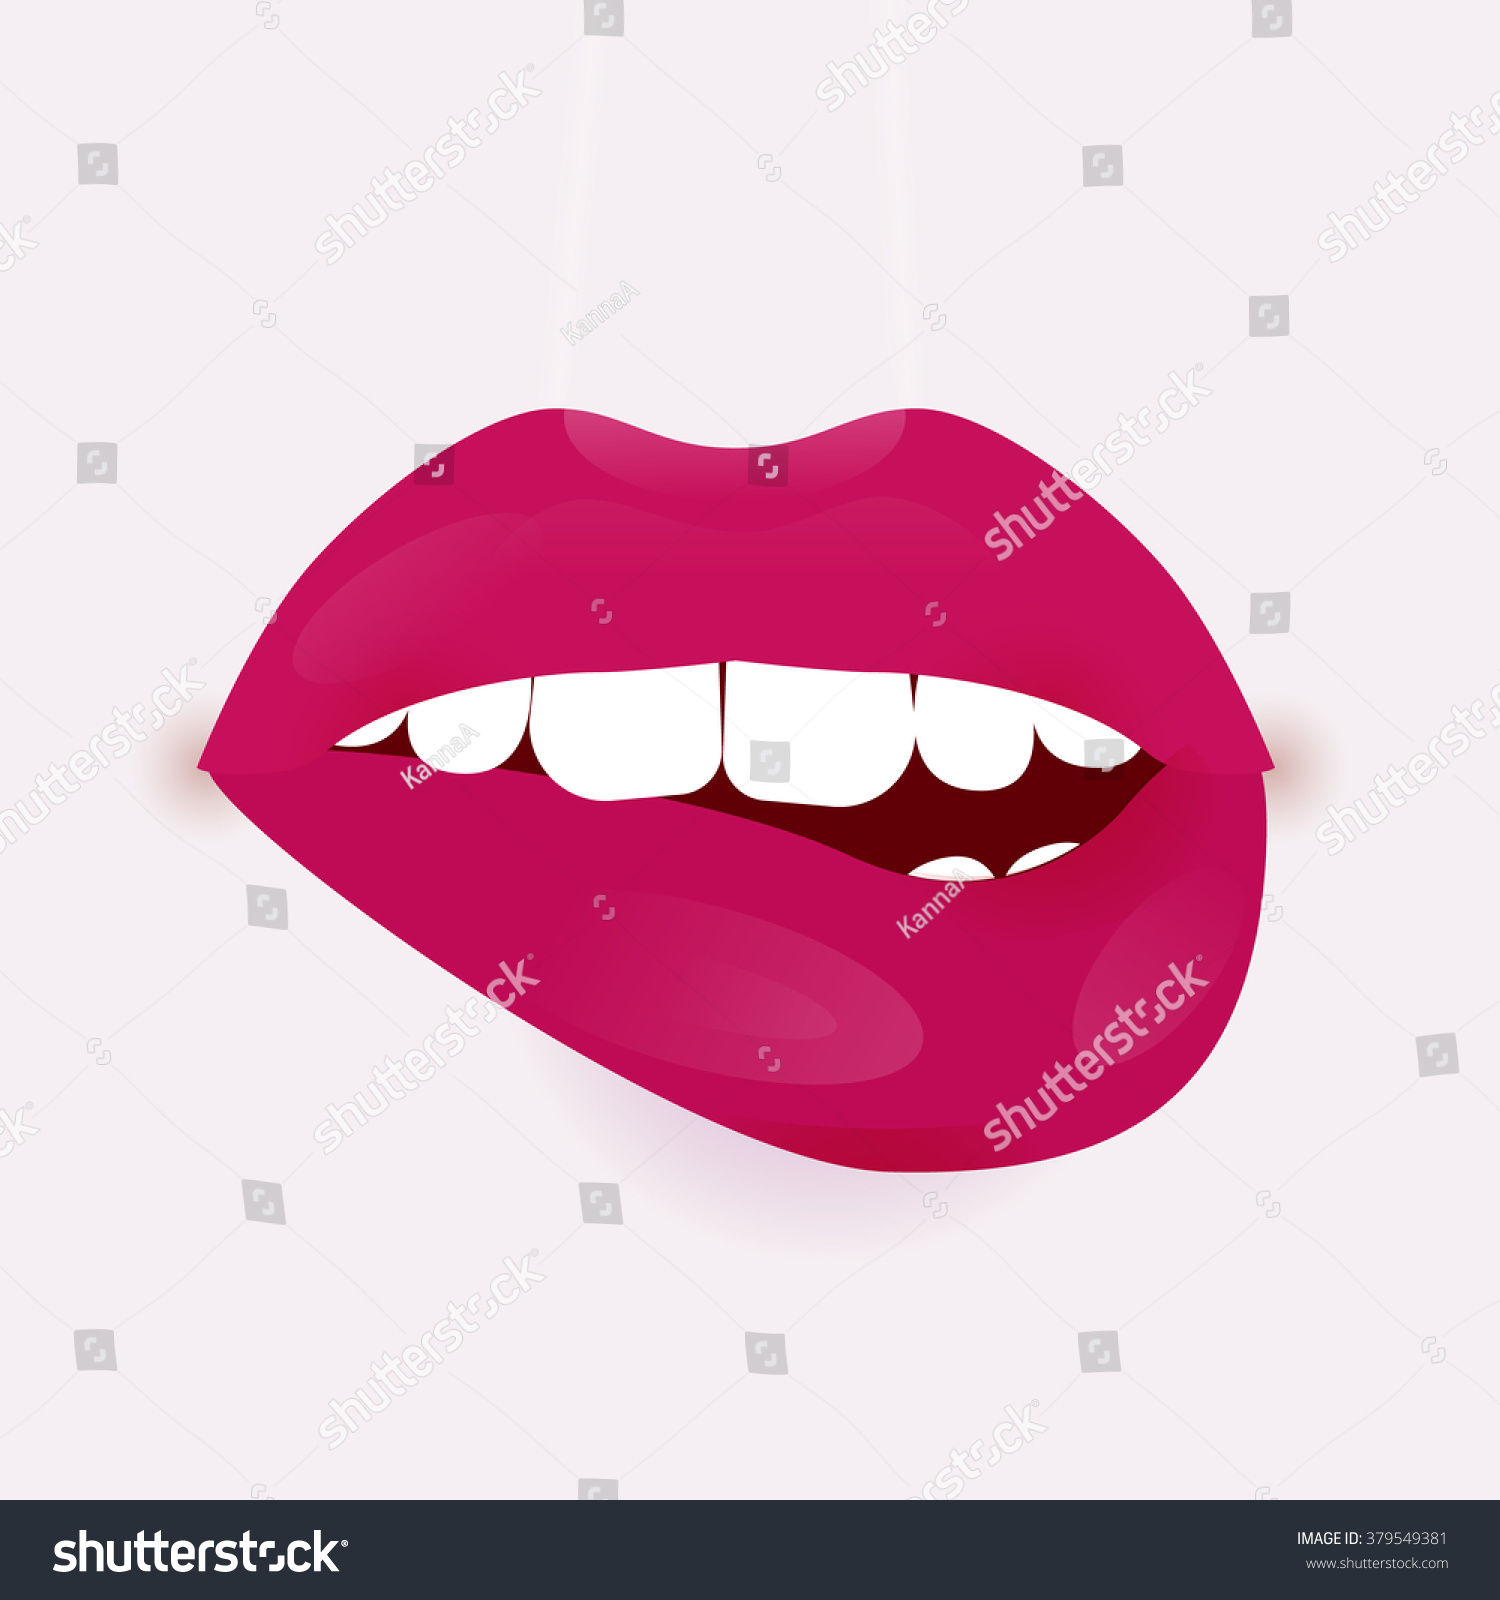 Glamour Vector Lip Icon Beautiful Shiny Stock Vector Royalty Free 379549381 Shutterstock 